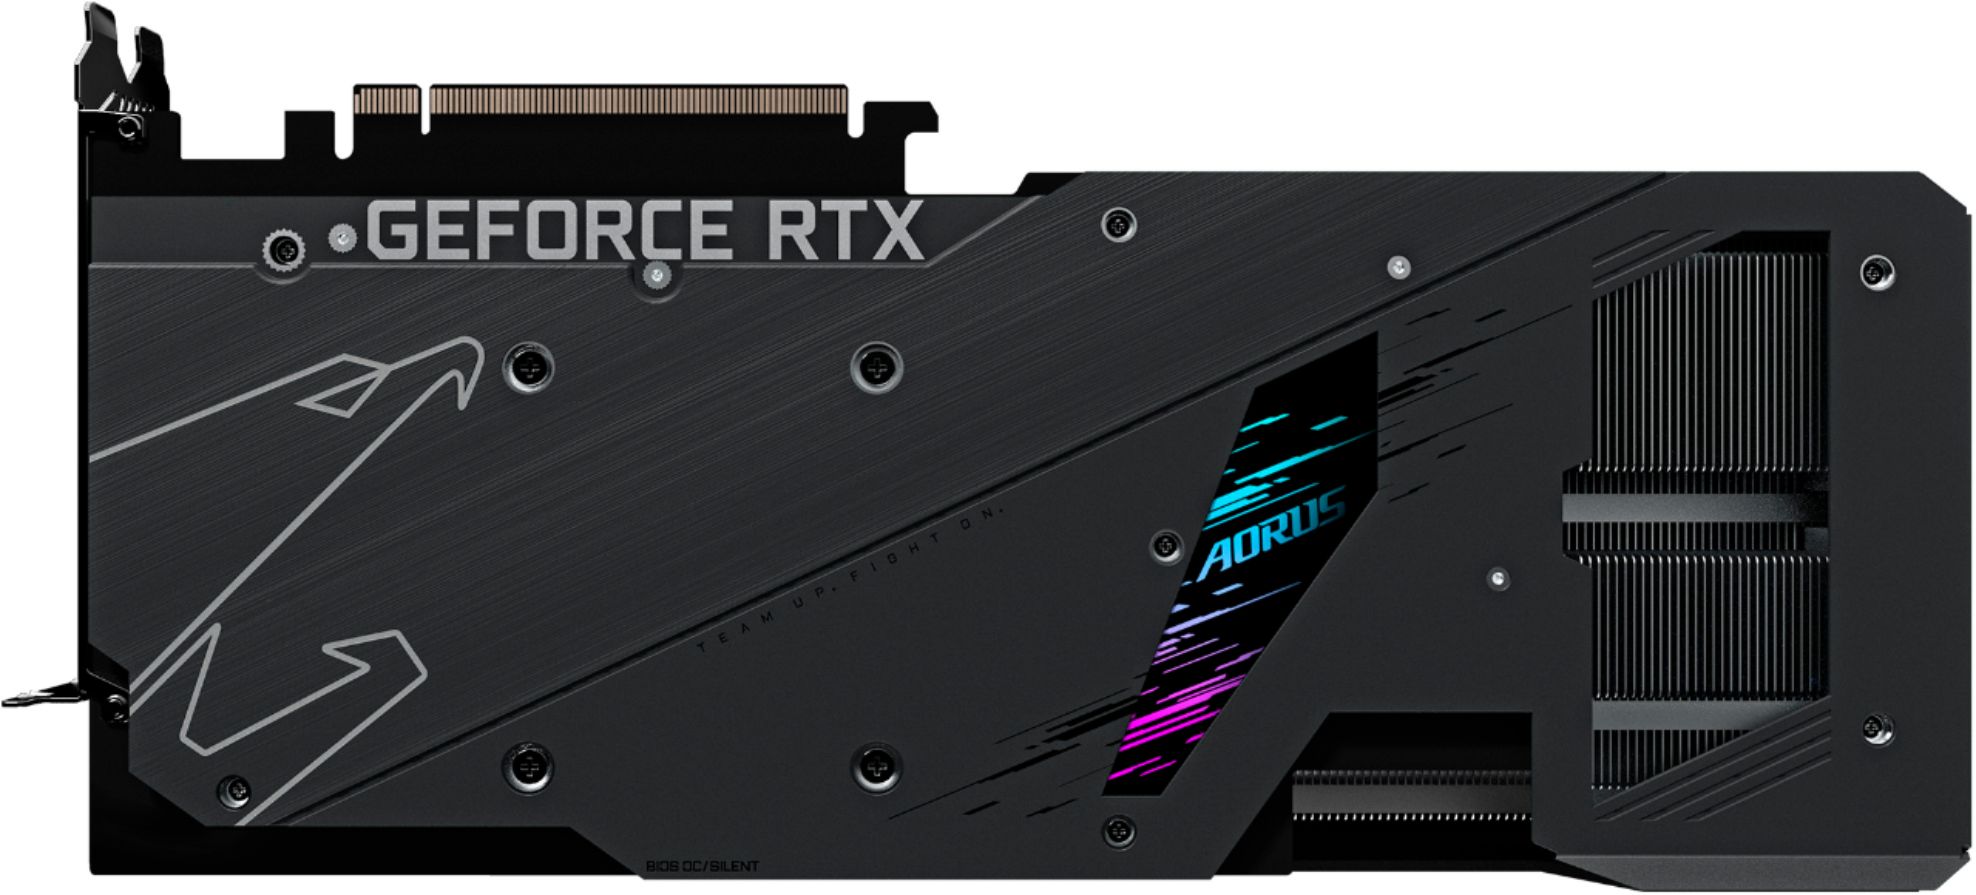 What do you recommend getting, an RTX 3080 Aorus Master or an RX